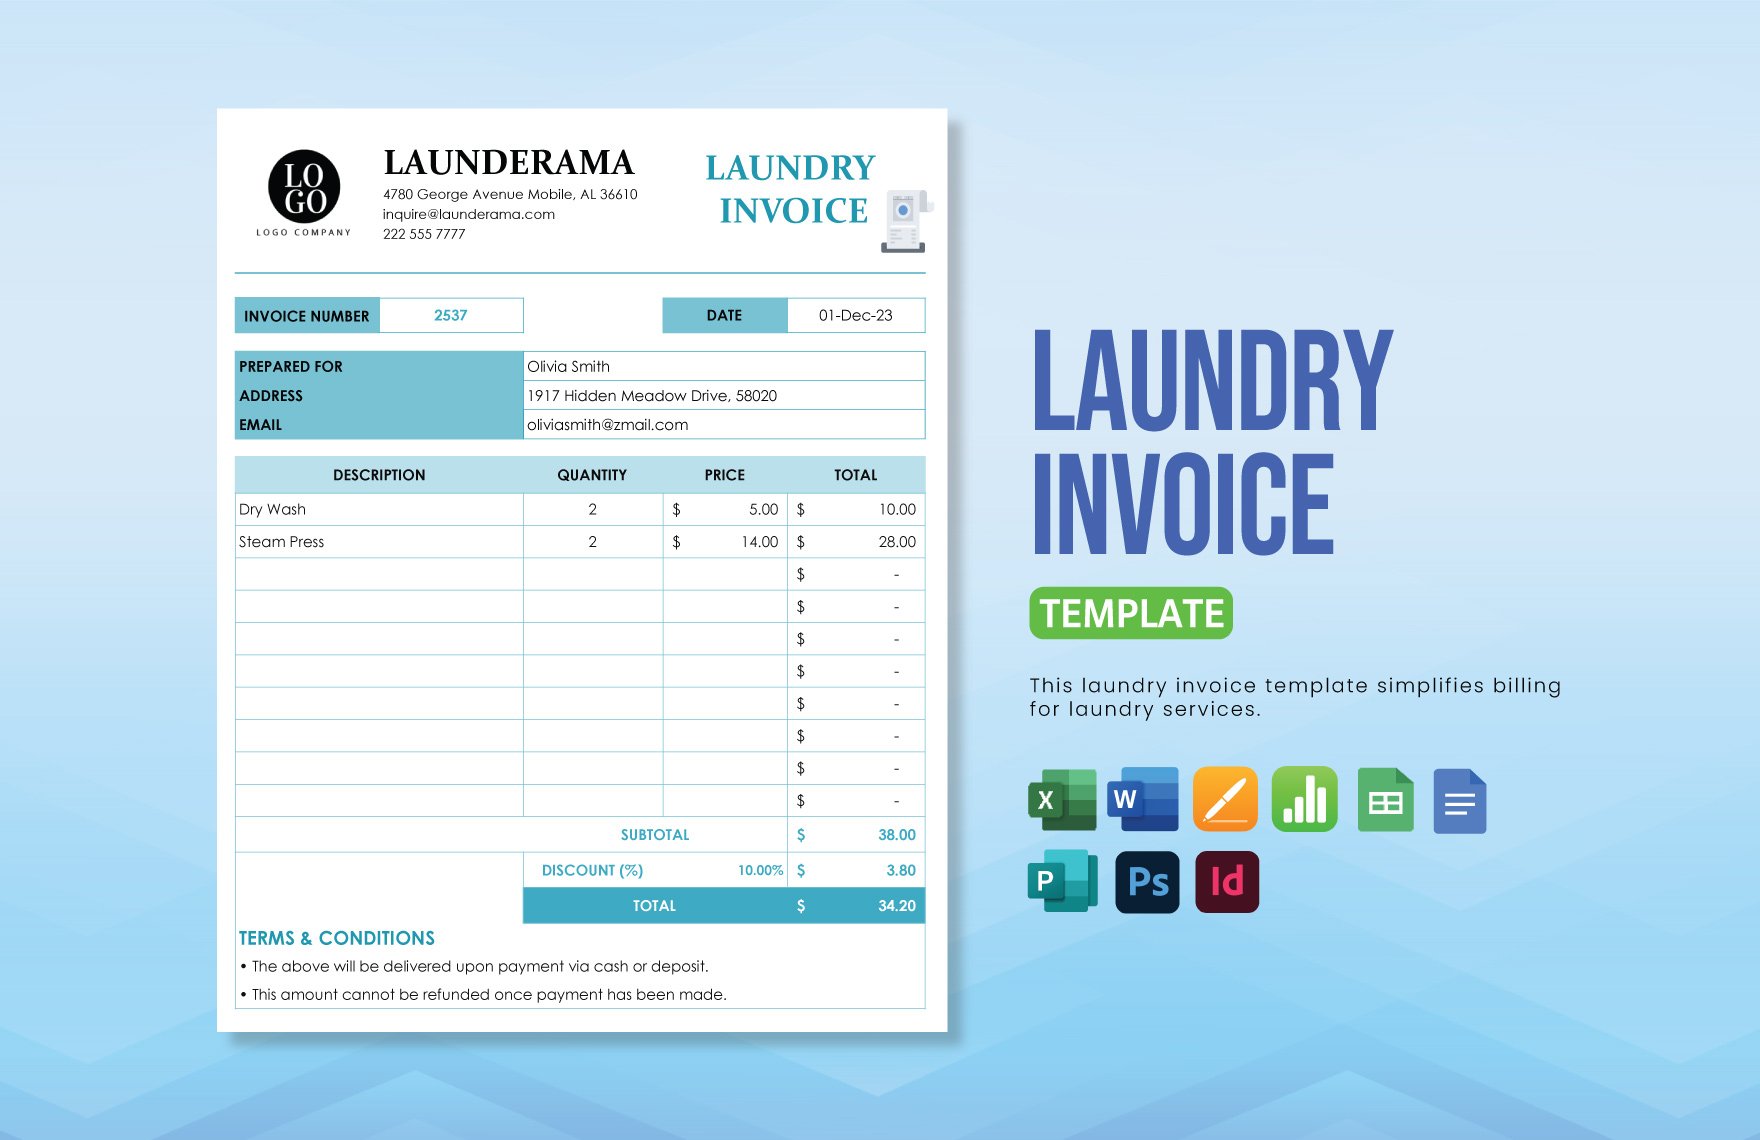 Laundry Invoice Template